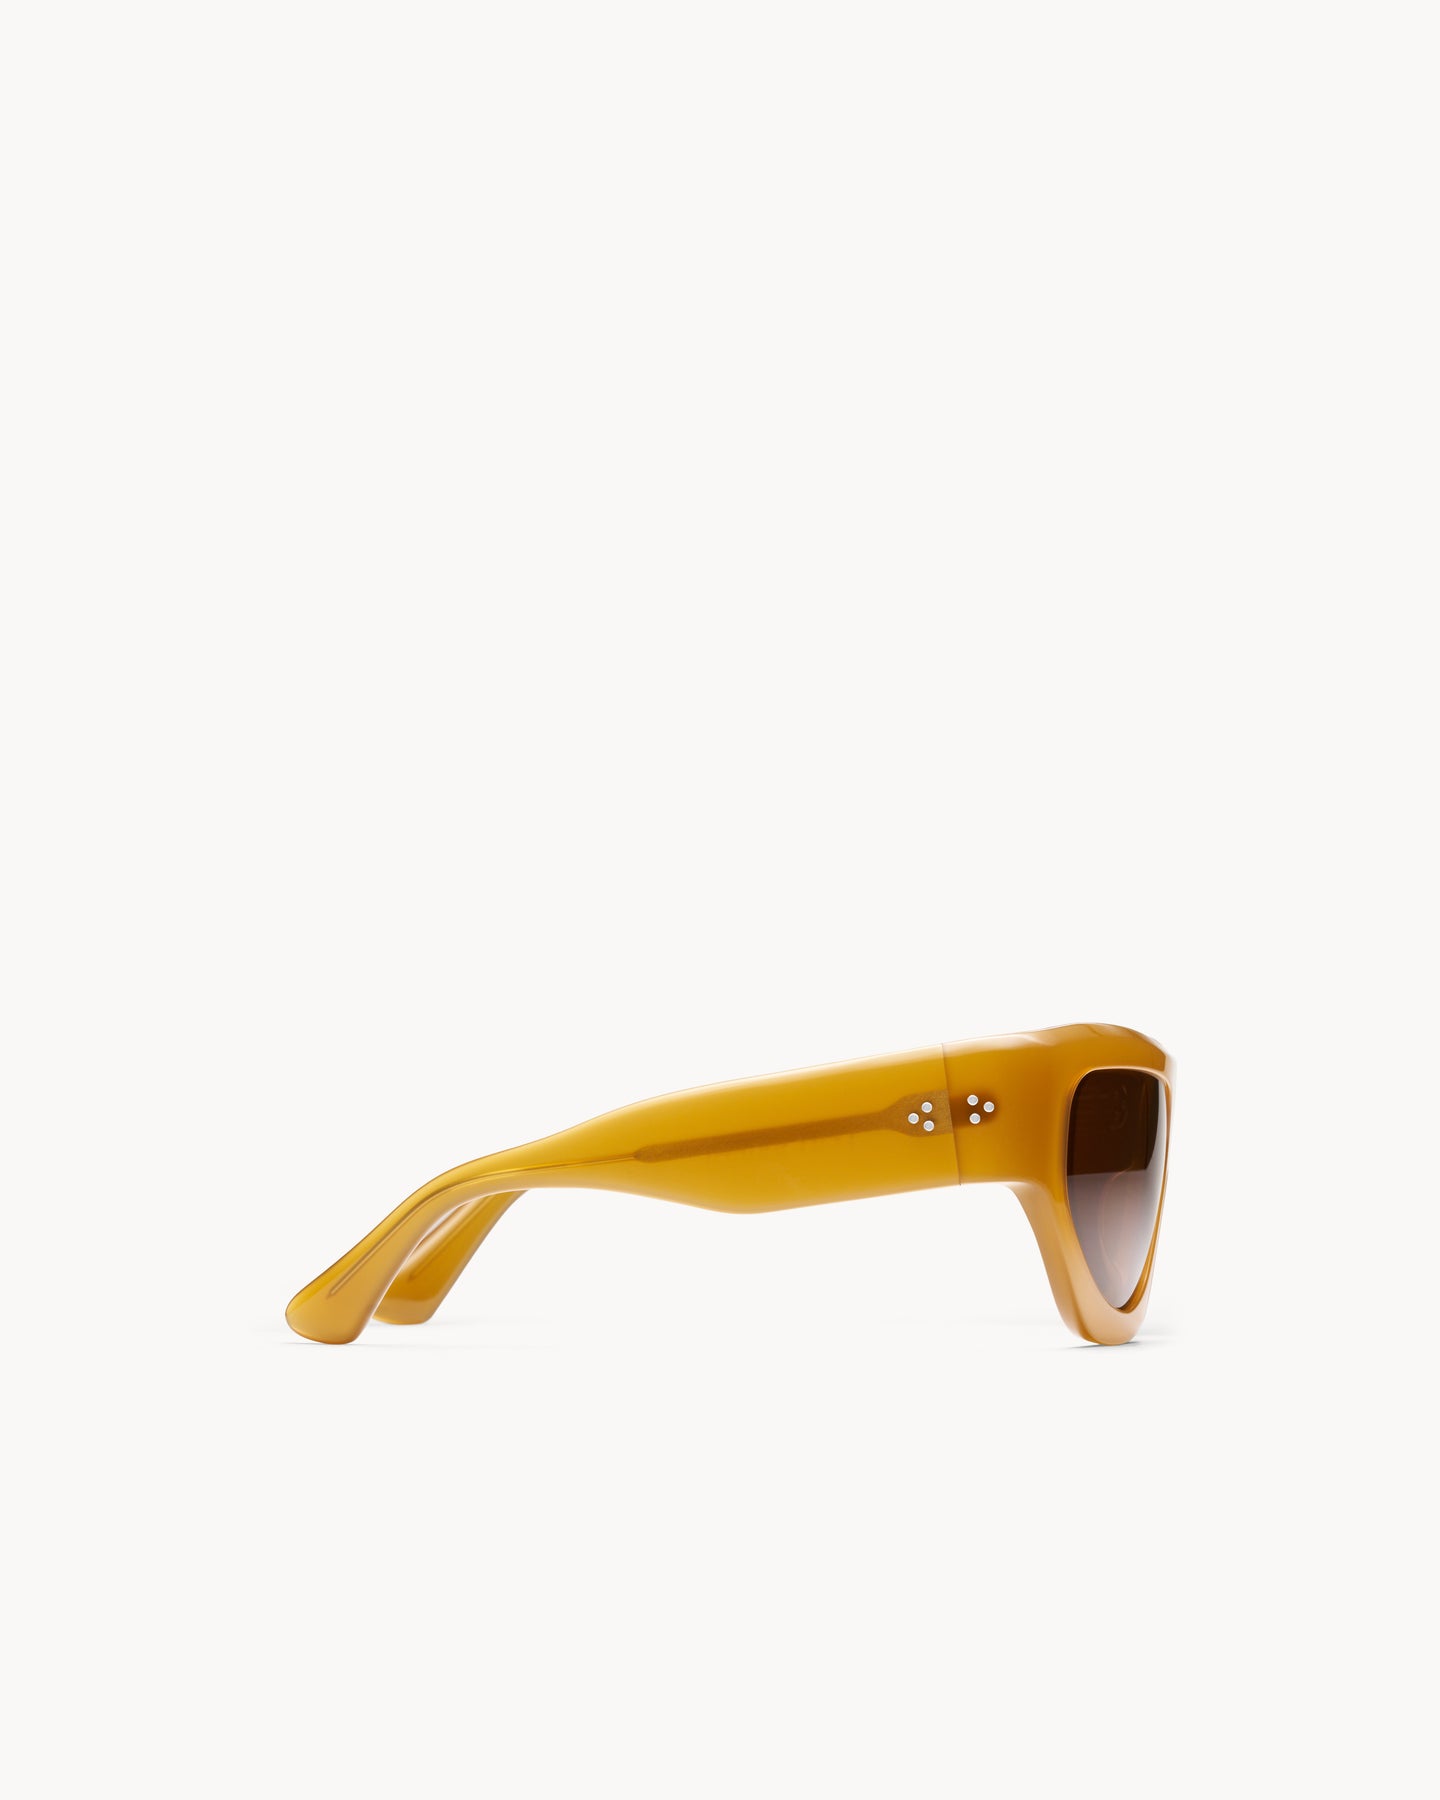 Port Tanger Dost Sunglasses in Yellow Ochra Acetate and Tobacco Lenses 4